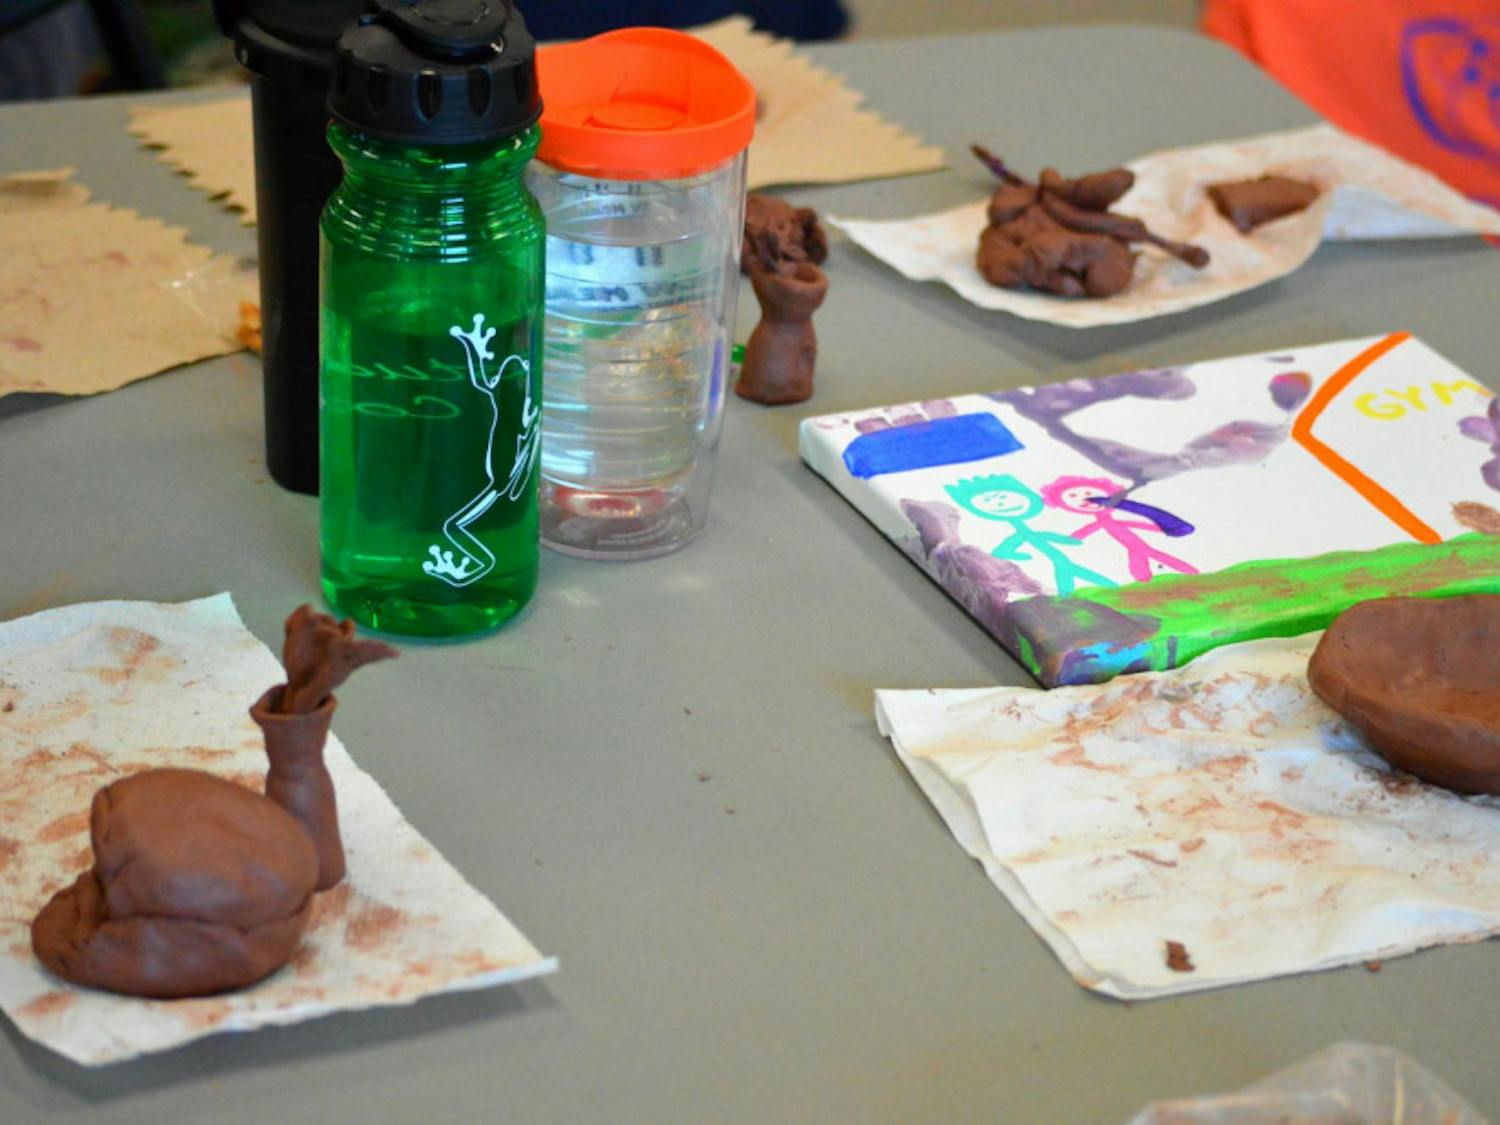 Campers at the Fear Facers Summer Camp create crafts and participate in other activities that encourage personal growth and aim to improve behaviors associated with obsessive-compulsive disorder and anxiety.
&nbsp;